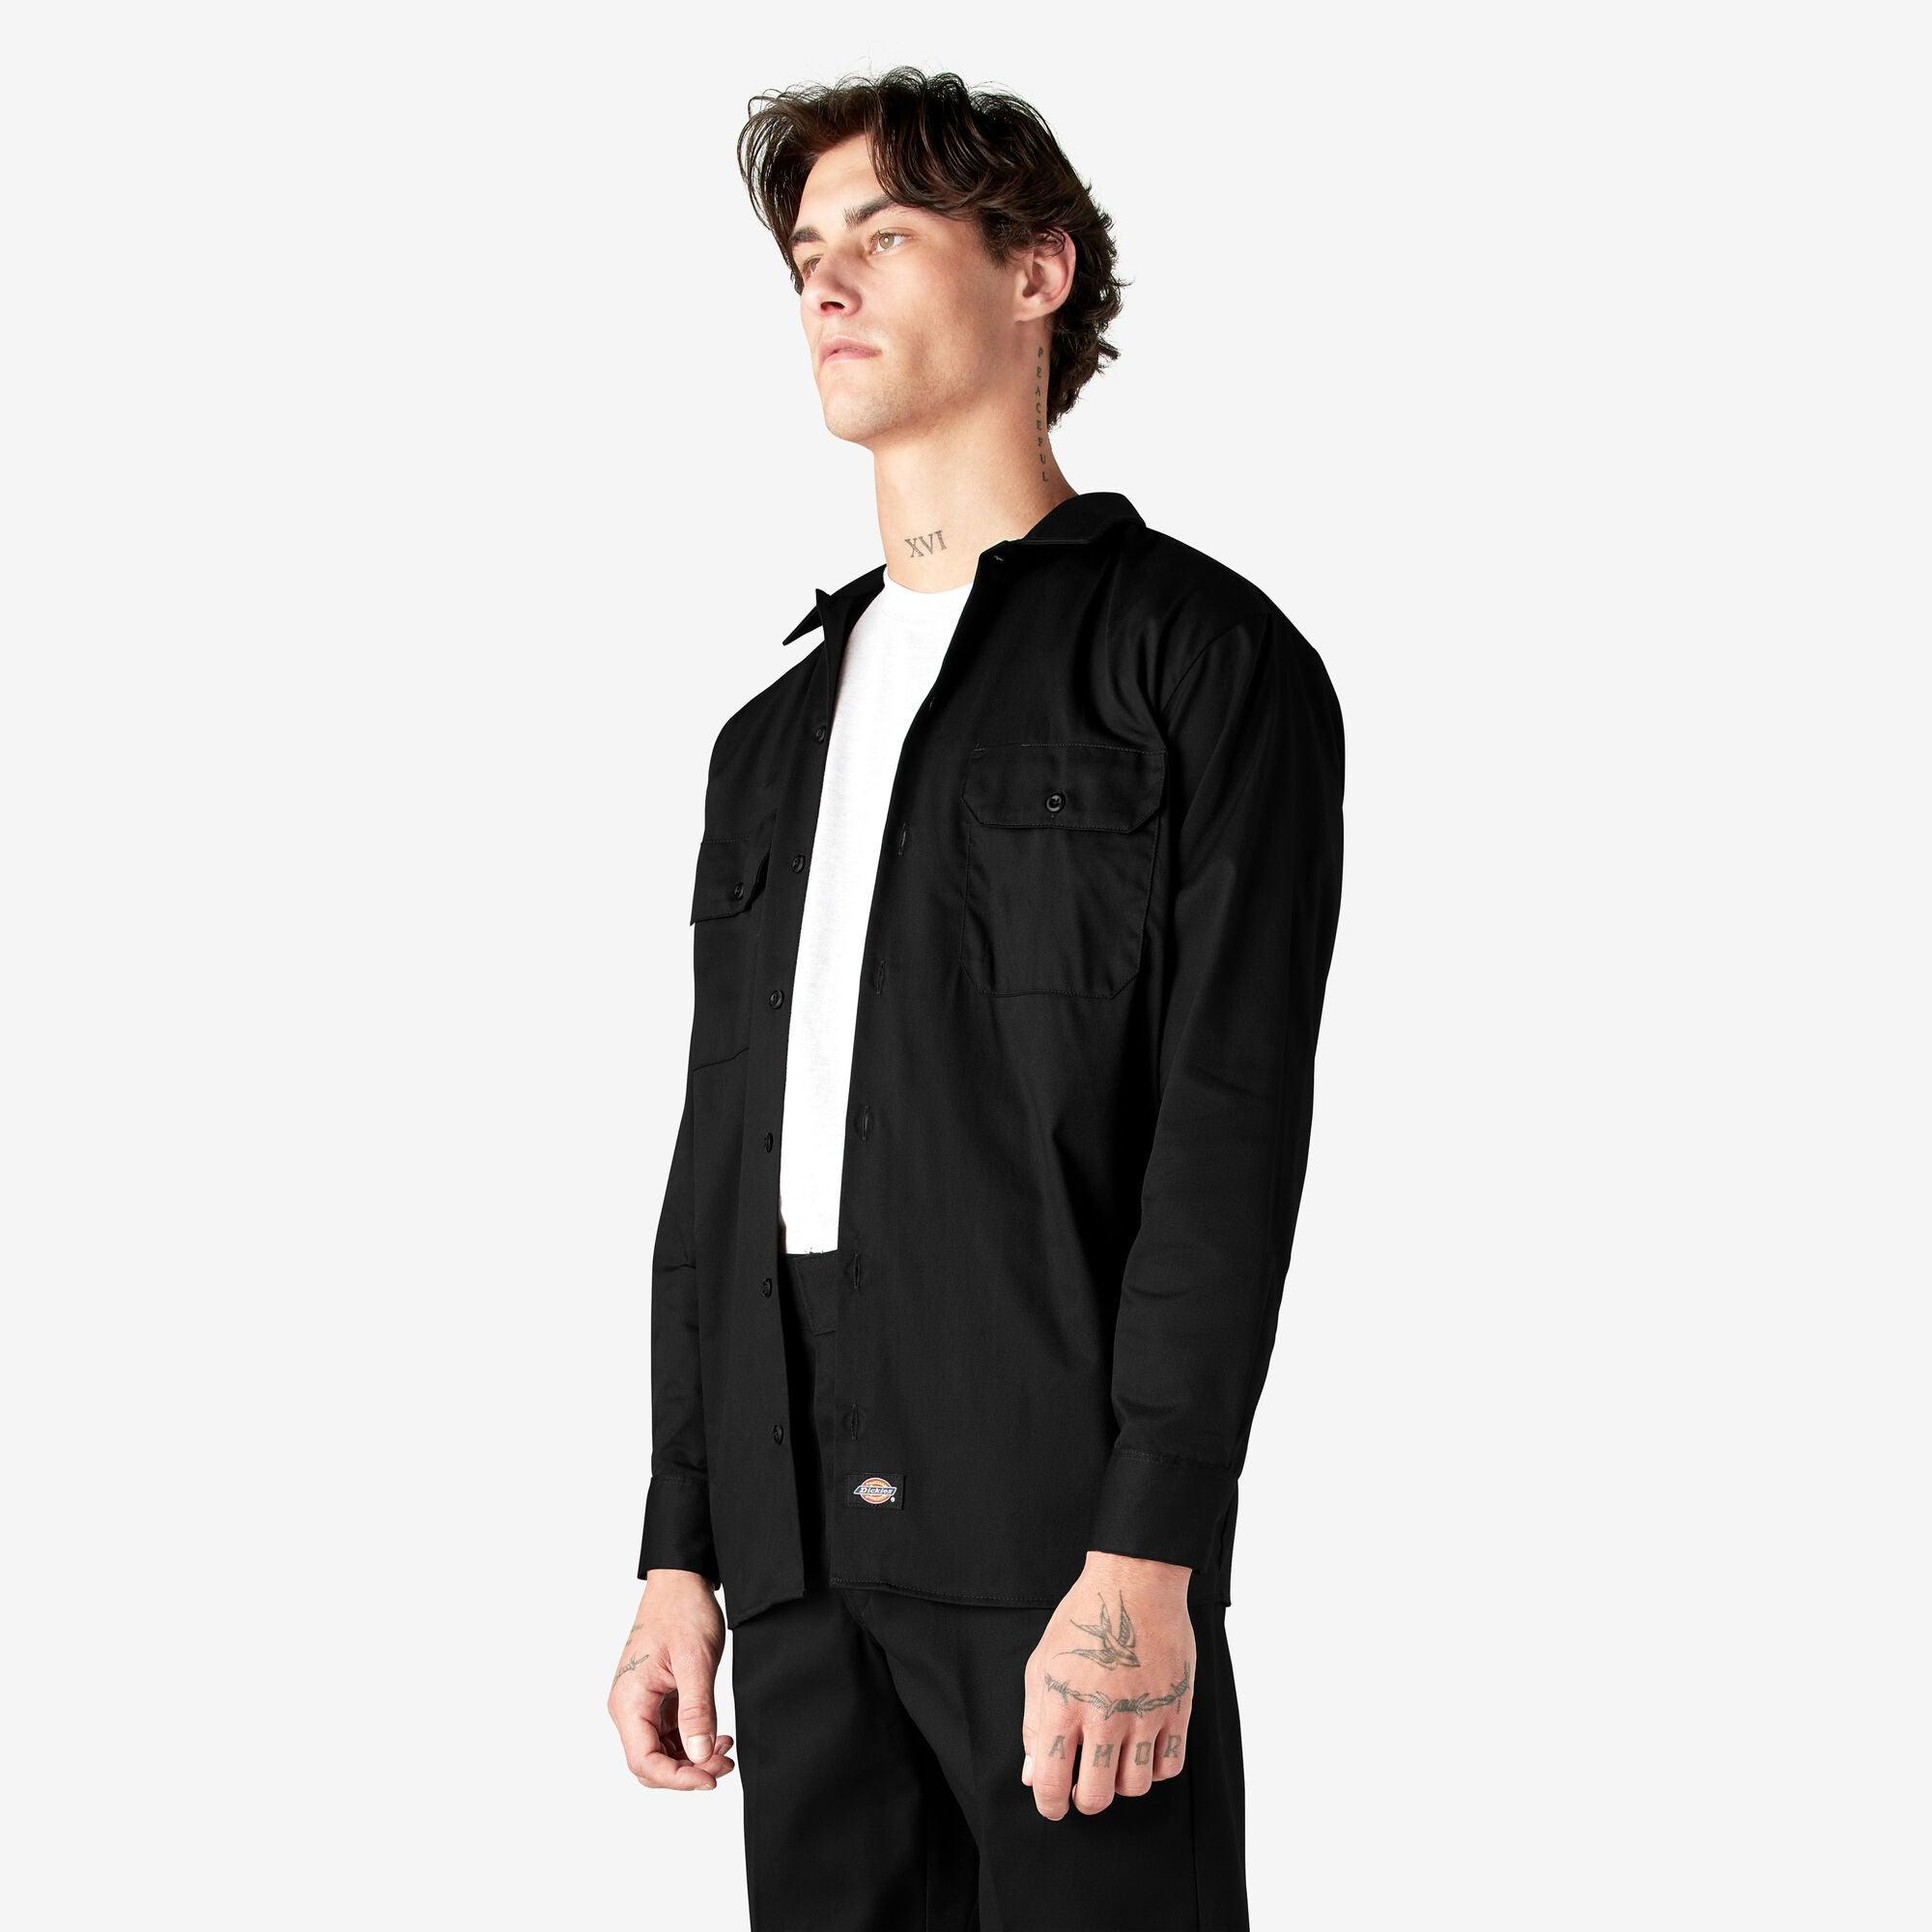 Long Sleeve Work Shirt, Black - Purpose-Built / Home of the Trades